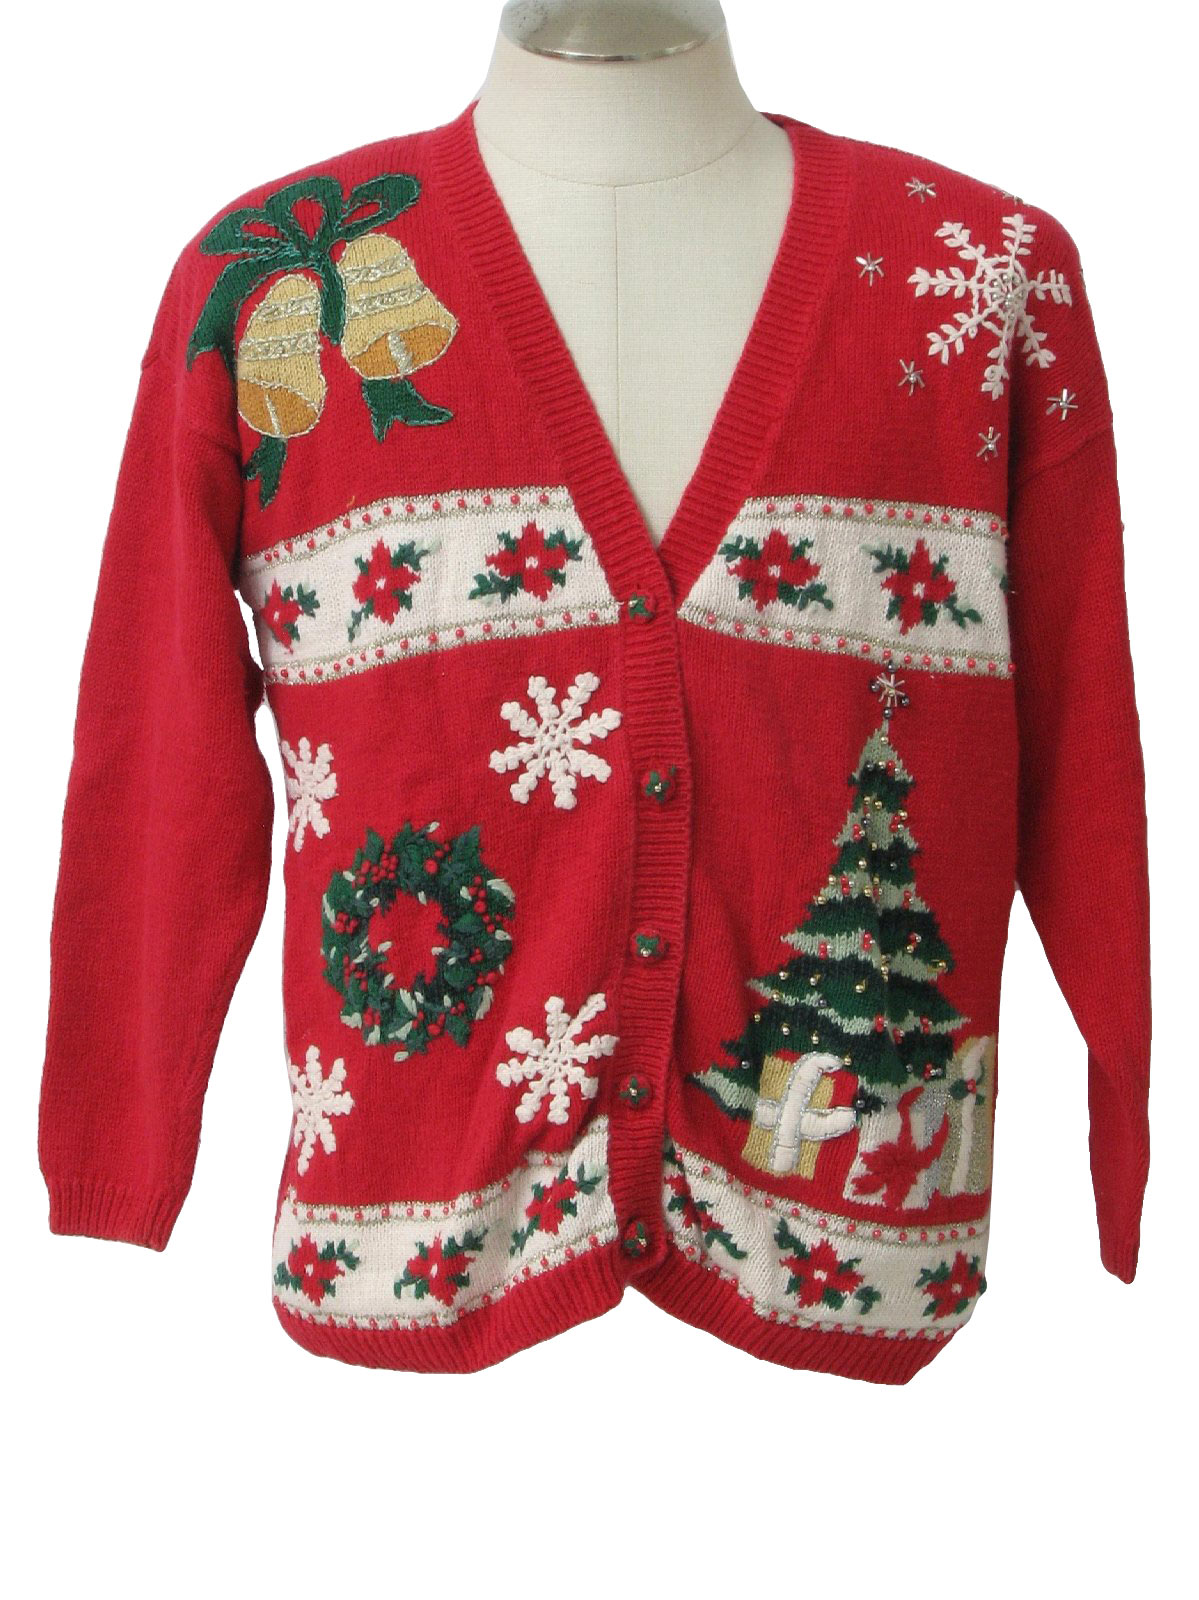 Ugly Christmas Cardigan Sweater: -Carly St. Claire- Unisex red, white ...